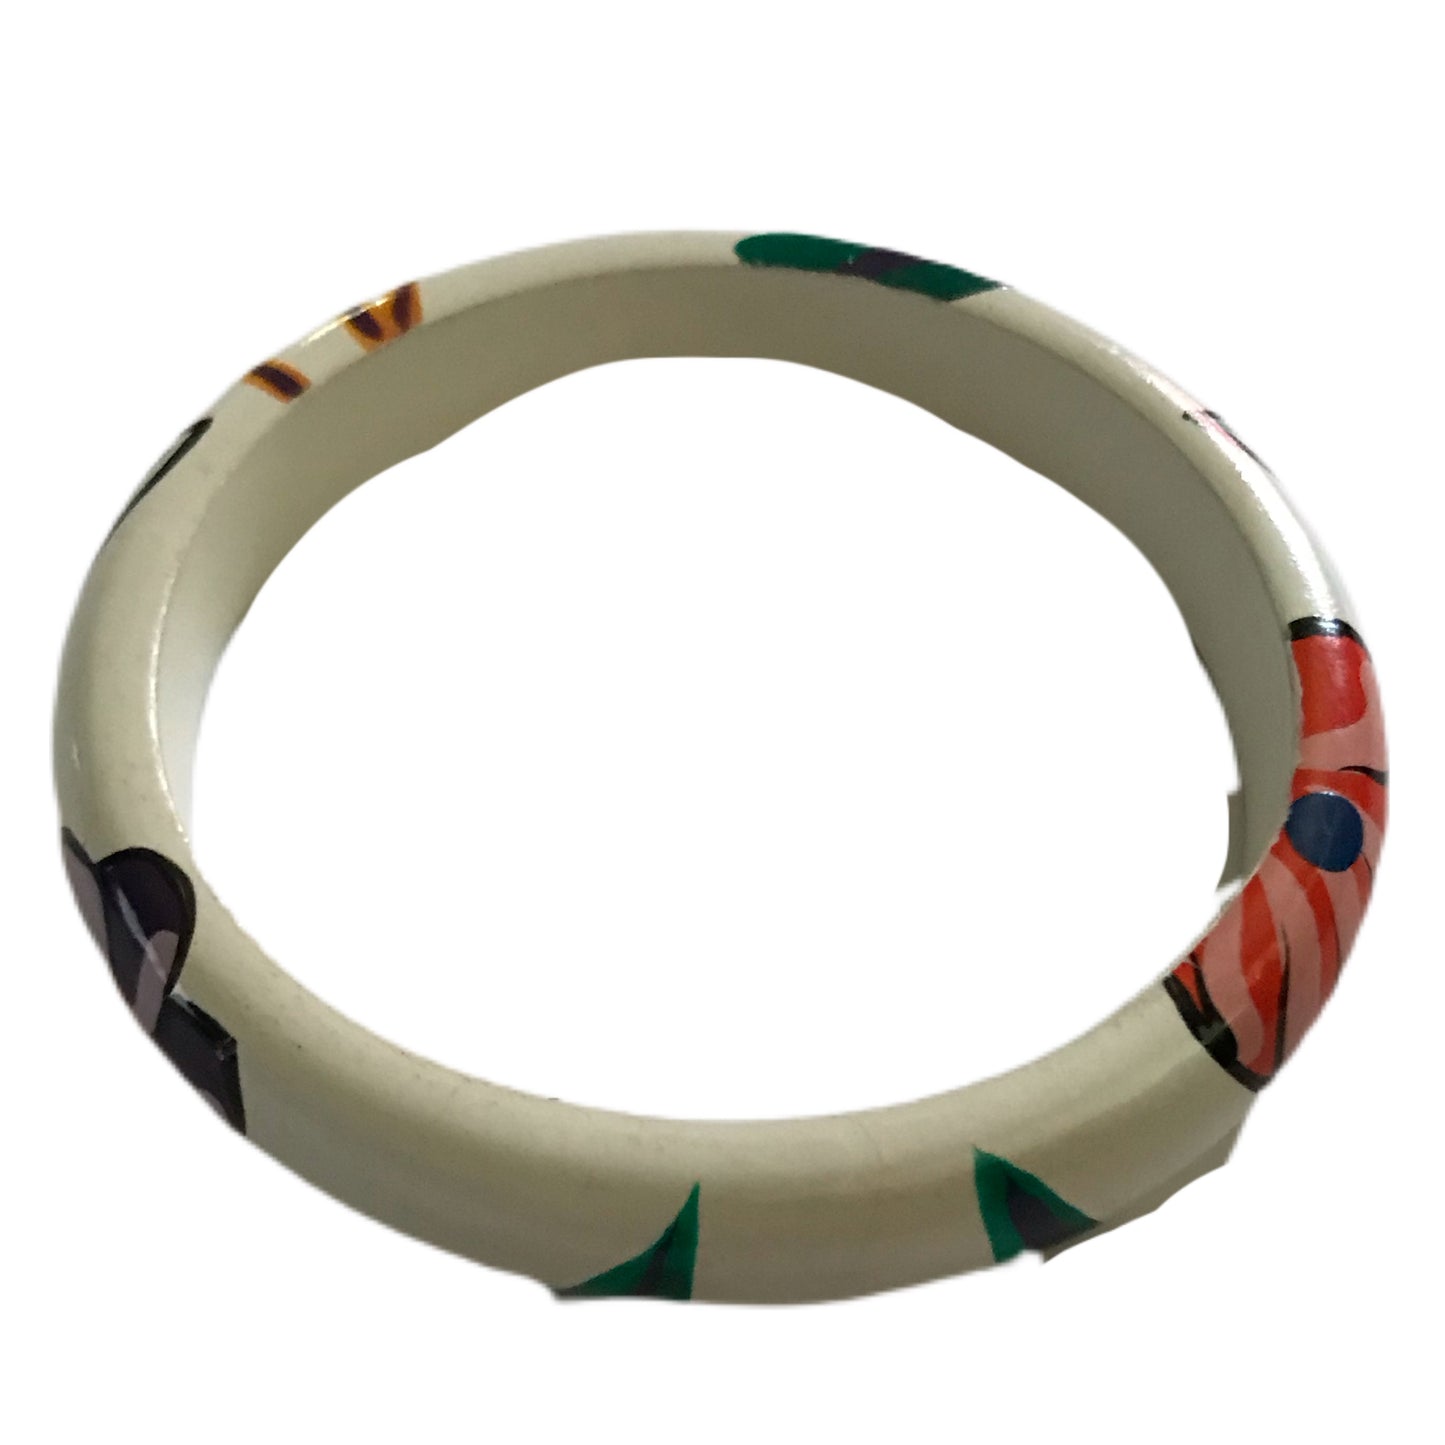 Tropical Flower Painted White Wooden Bangle Bracelet circa 1980s